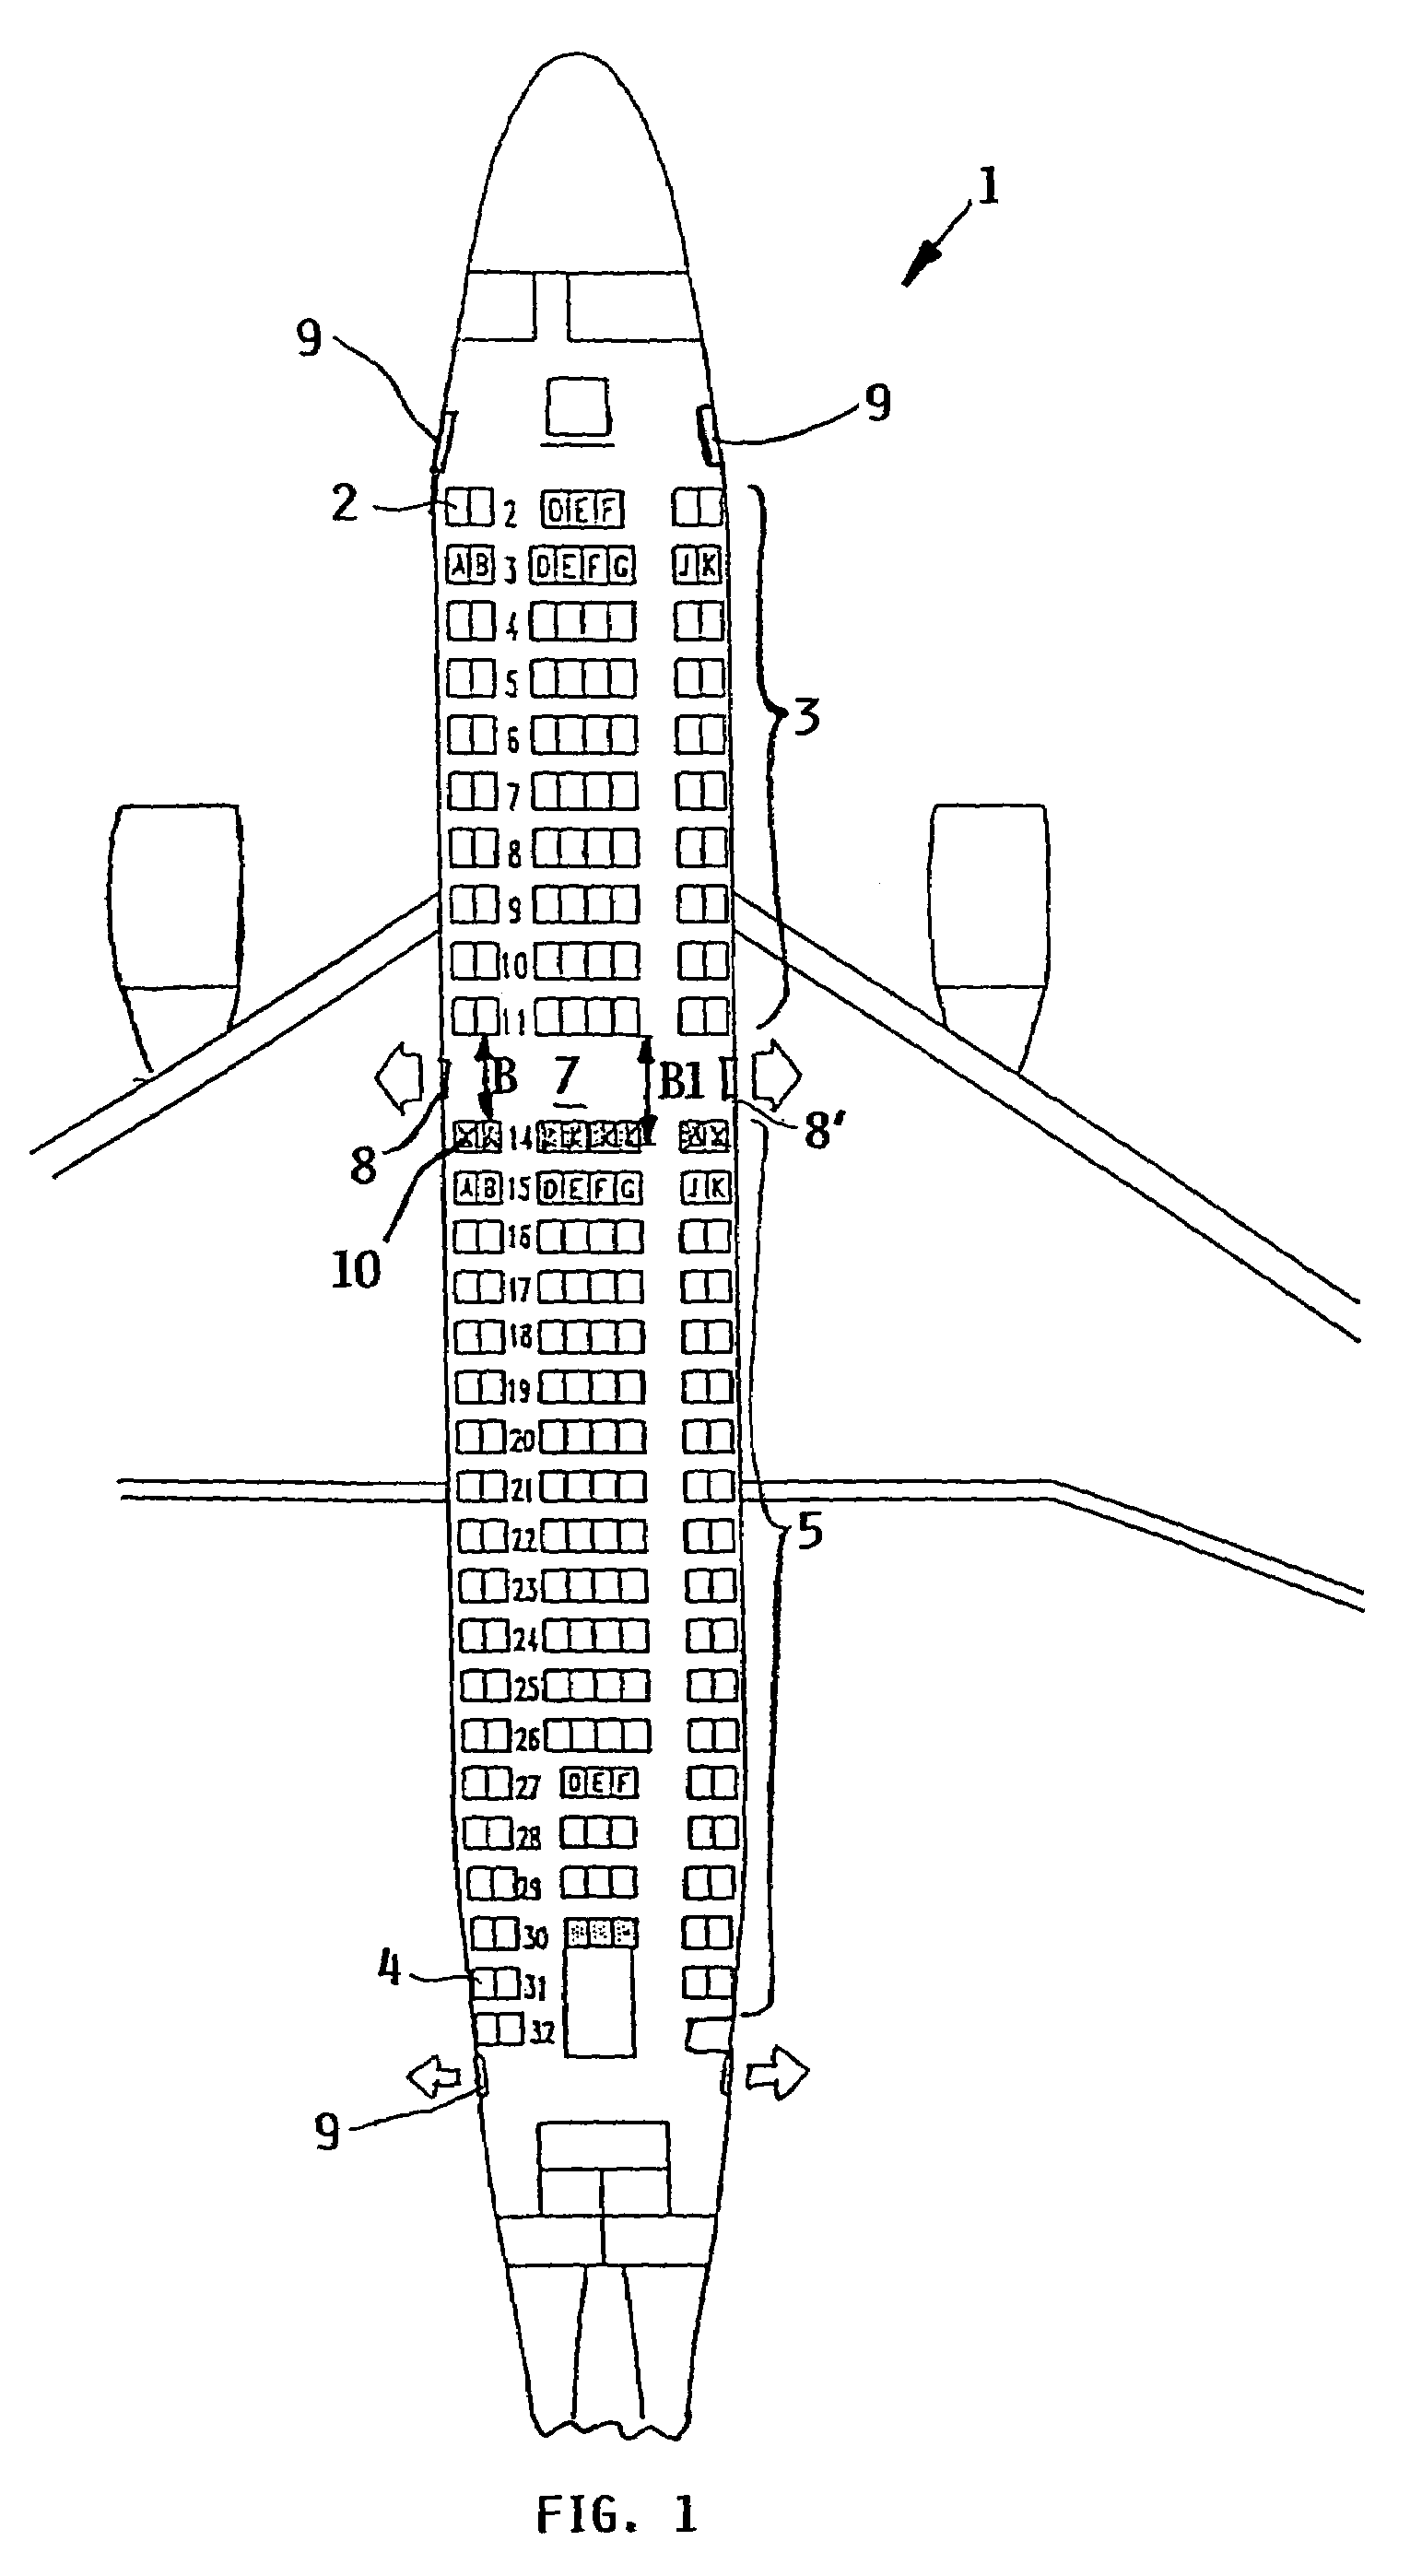 Seating arrangement especially adjoining an emergency exit in an aircraft passenger cabin